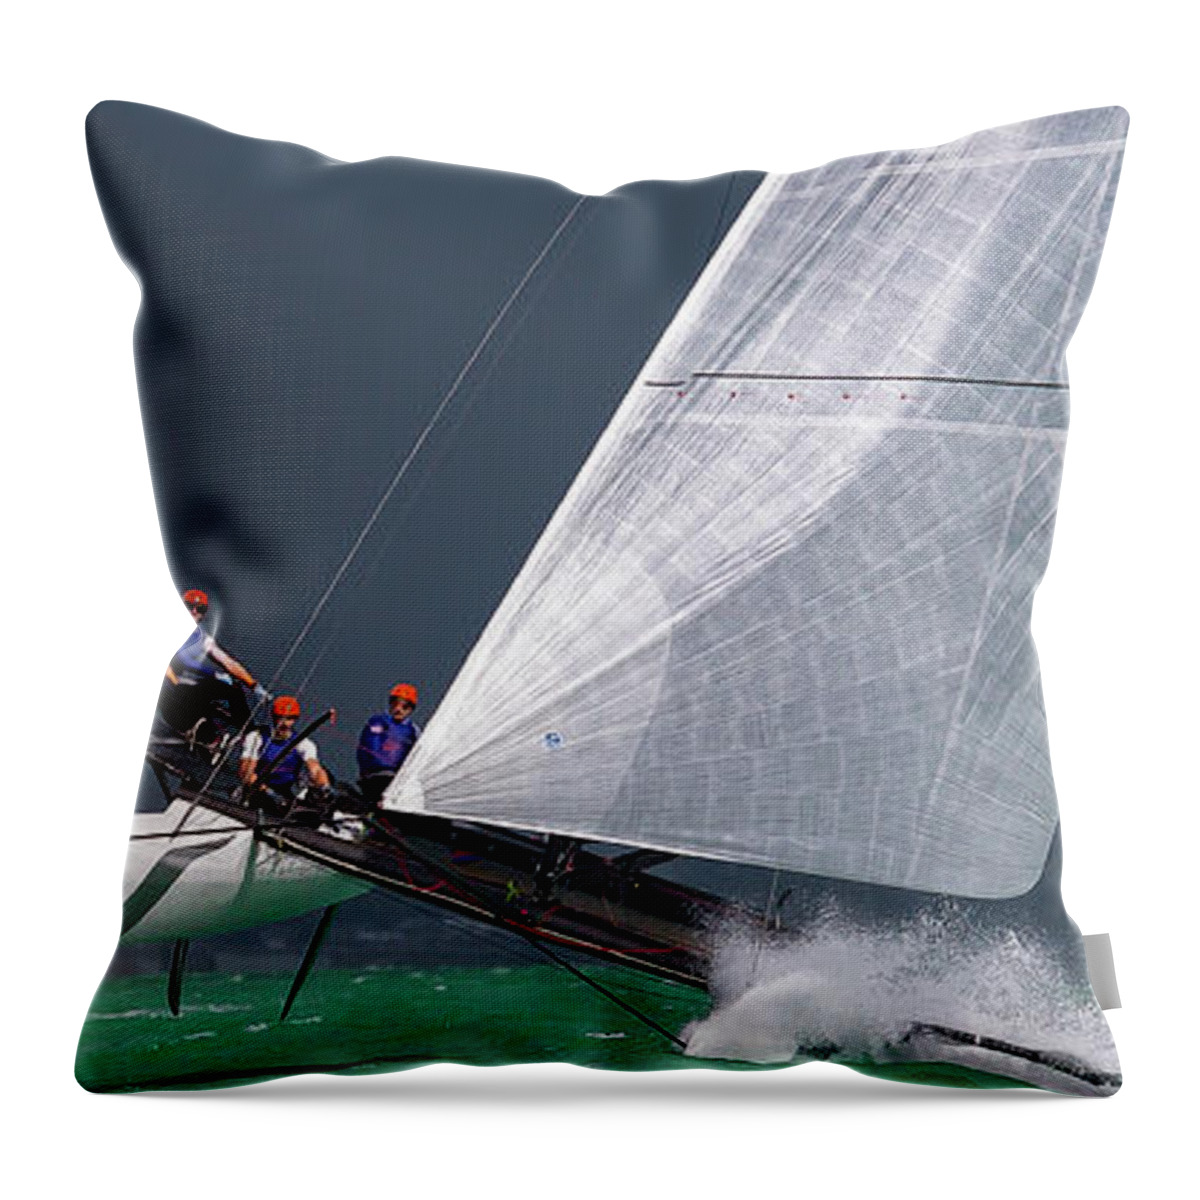 M32 Throw Pillow featuring the photograph You Are The Sky by Steven Lapkin